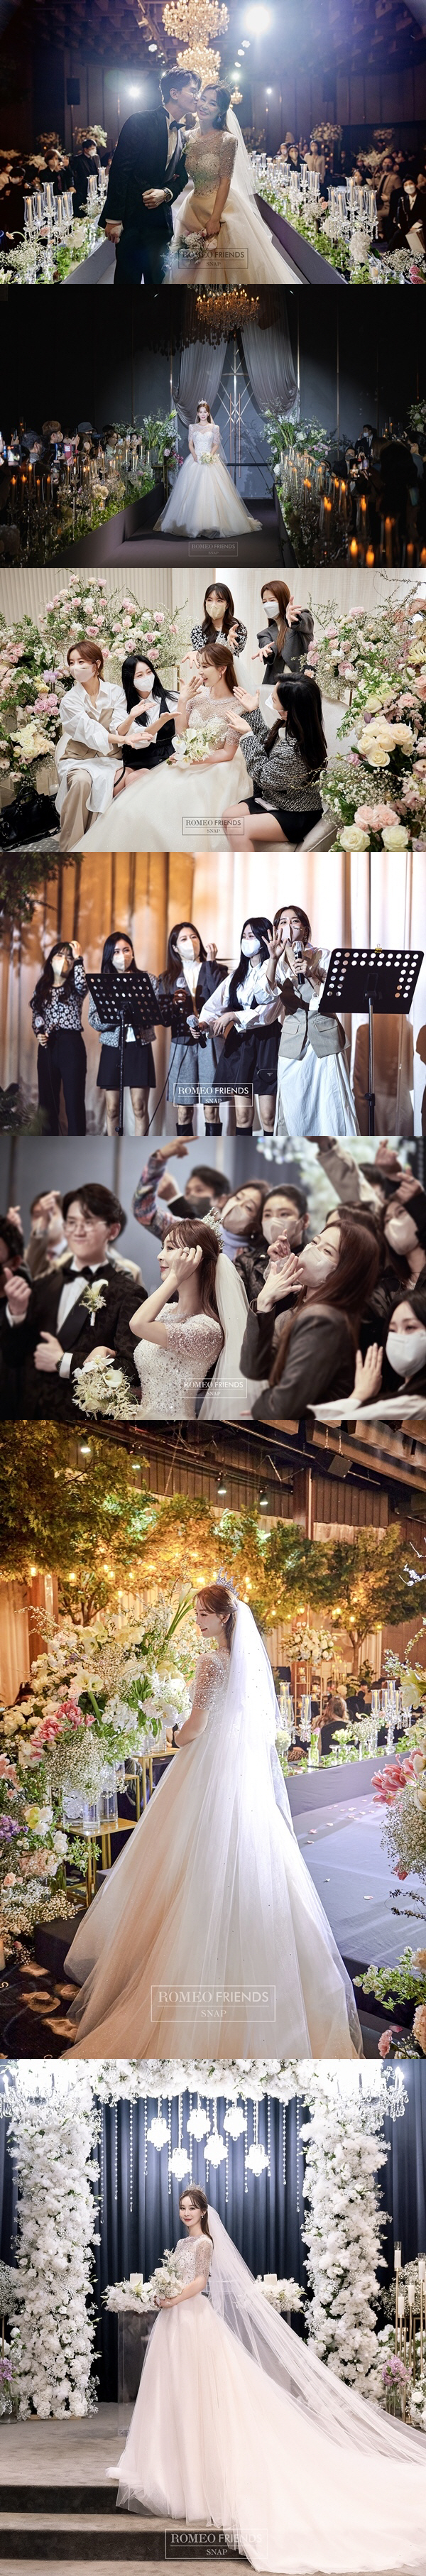 Miss Trot 2 singer Yoon Tae-hwa rang the wedding march.Yoon Tae-hwa said, Yoon Tae-hwa married a lover who had been dating for three years at Seoul on the afternoon of the 26th.In the public wedding picture, Yoon Tae-hwa shows off her beautiful wedding dress. Yoon Tae-hwa, who always smiles shyly in front of the guests, attracts attention.Yoon Tae-hwas wedding ceremony was held at the ceremony of Miss Trot 2 friends such as MC Juns society and practical music and motives of Baekje Art University, Yang ji-eun, Huh Chanmi, Ryu Wonjung, Eunga Eun and Hong Ji-yoon.On the other hand, Yoon-hwas husband is an older non-entertainer, and he is known to have nursed Yun-hwas mother in bed even during his love affair with Yoon-hwa.In this way, Yoon-hwa and his family were taken care of throughout the love affair, and Yoon-hwa also decided to marry.Yoon-hwa, who made his debut as a trot singer at the age of 19 in 2009, is a 14-year-old singer.Last year, TV CHOSUN Tomorrow is Miss Trot 2, Youre a judge received praise from the master audition, and became a strong candidate for the championship at once.In the next round, he proved his excellent singing ability and delicate expression such as Gizard Dad, Rain, Love and recorded the final 13th place.Even after the end of the program, TV Chosun Miss Trot 2 Gala Show, I Call for Applications - Love Call Center, Miss Trot 2 Talk Concert, Mongsu Academic School: Life School, Lets do my daughter, Tuesday is good at night